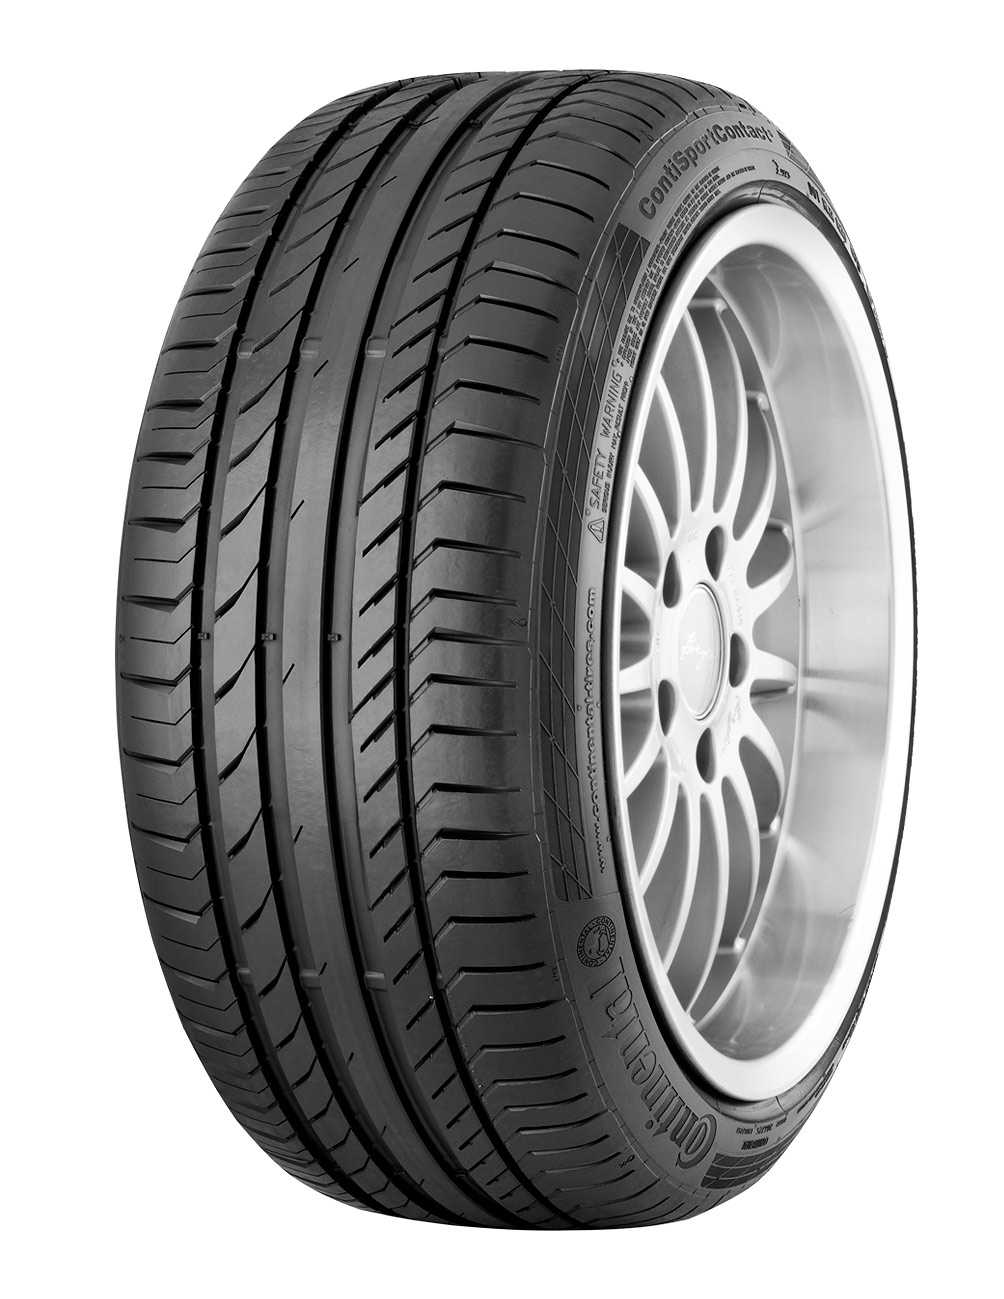 Anvelopa Vara Continental Sport Contact 5 Seal Inside 235/45R17 94W